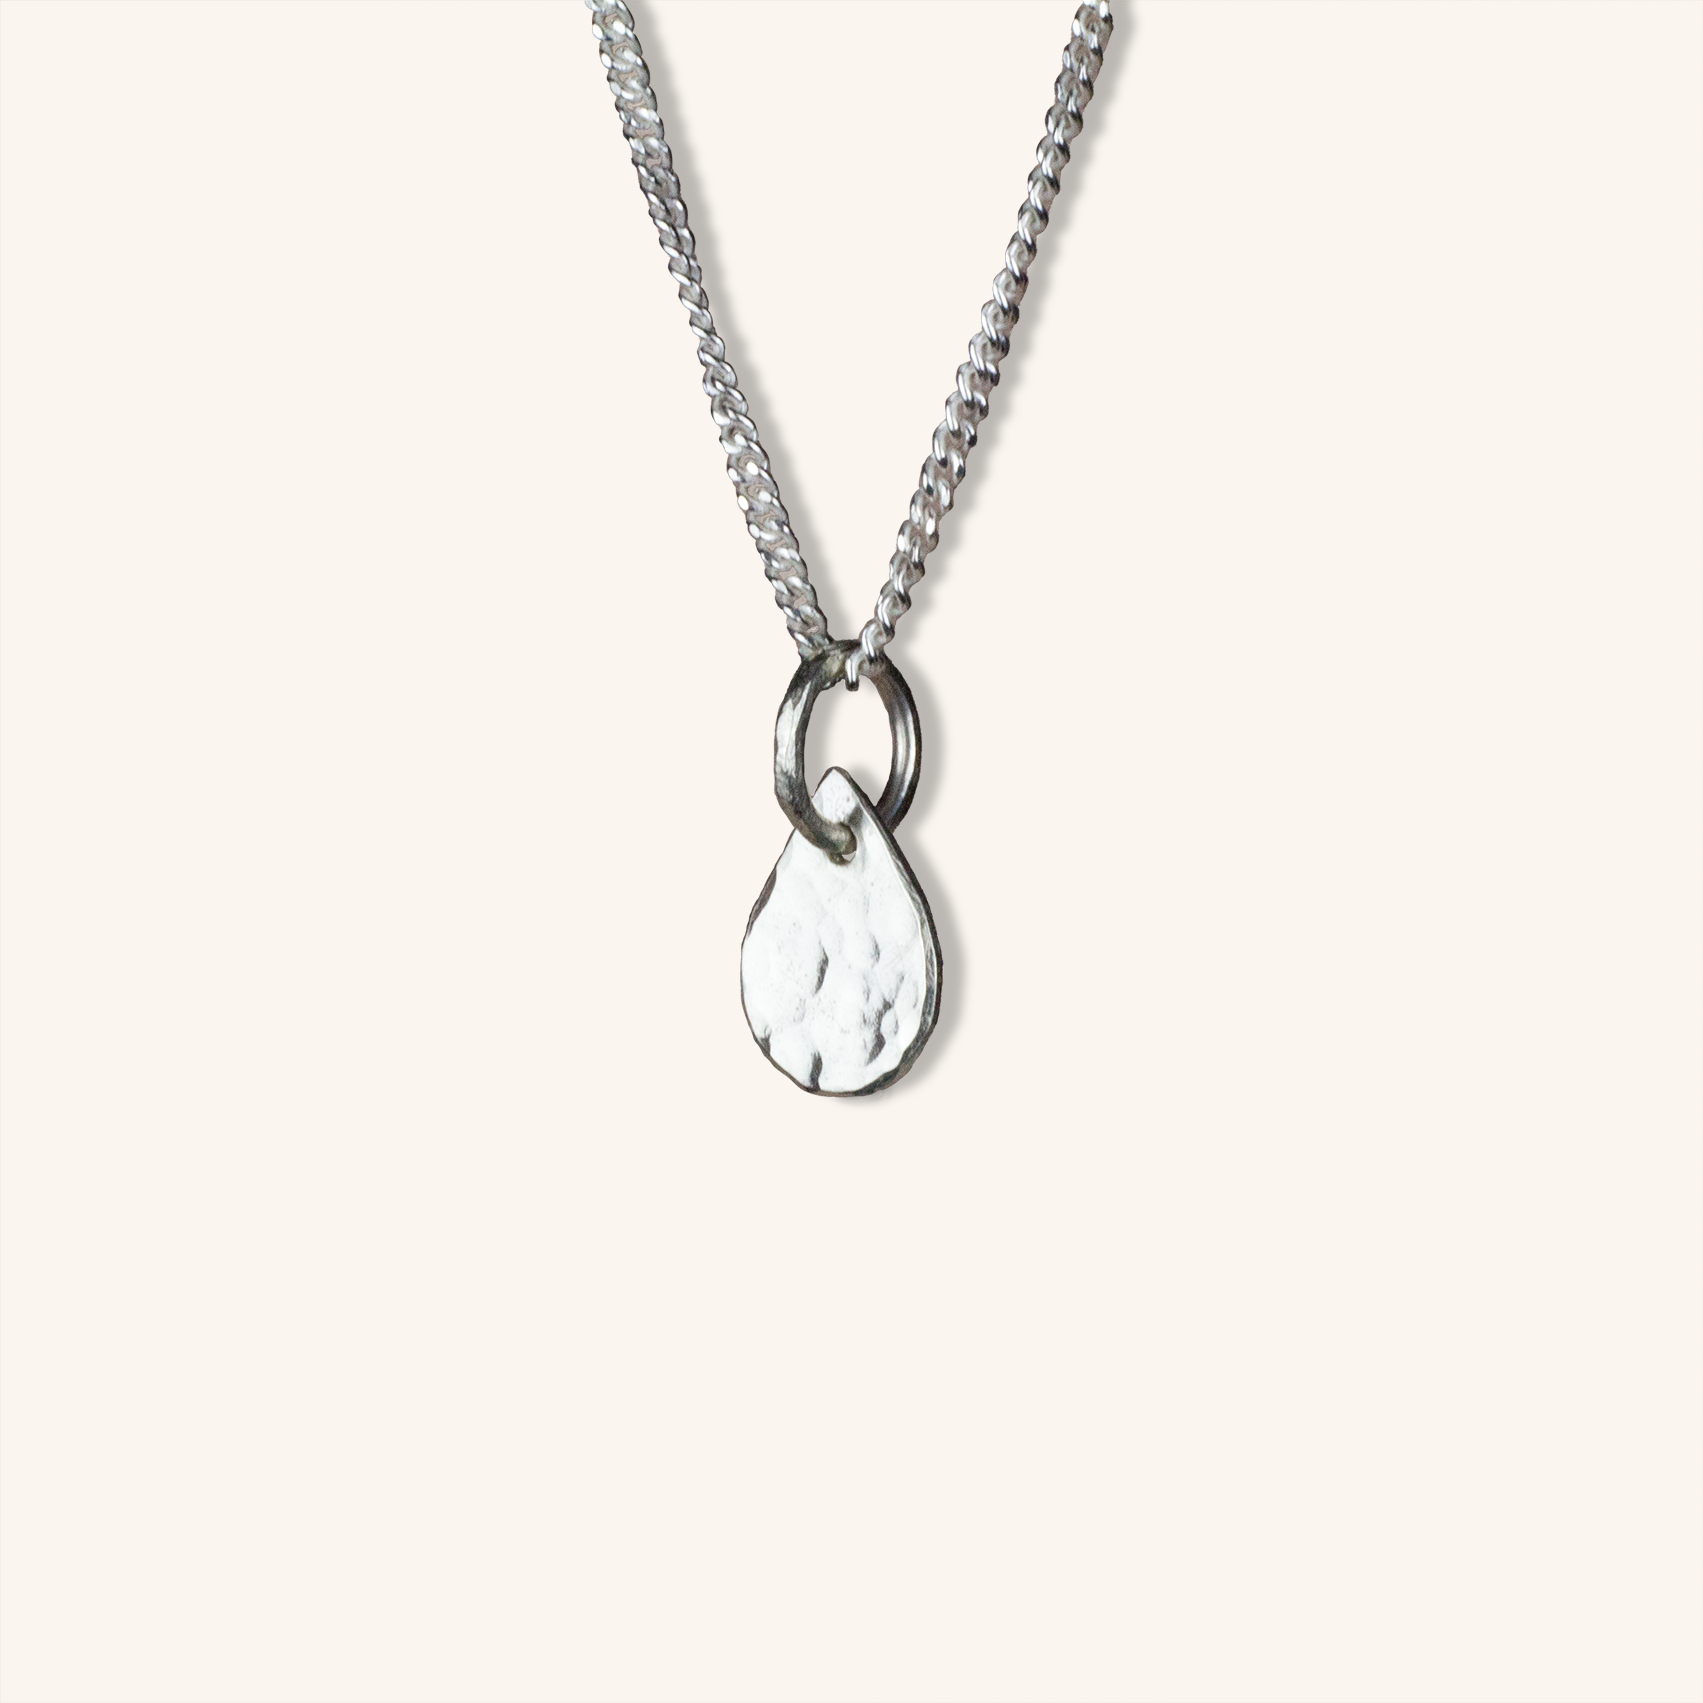 Tears of hope, Pendant Necklace Silver